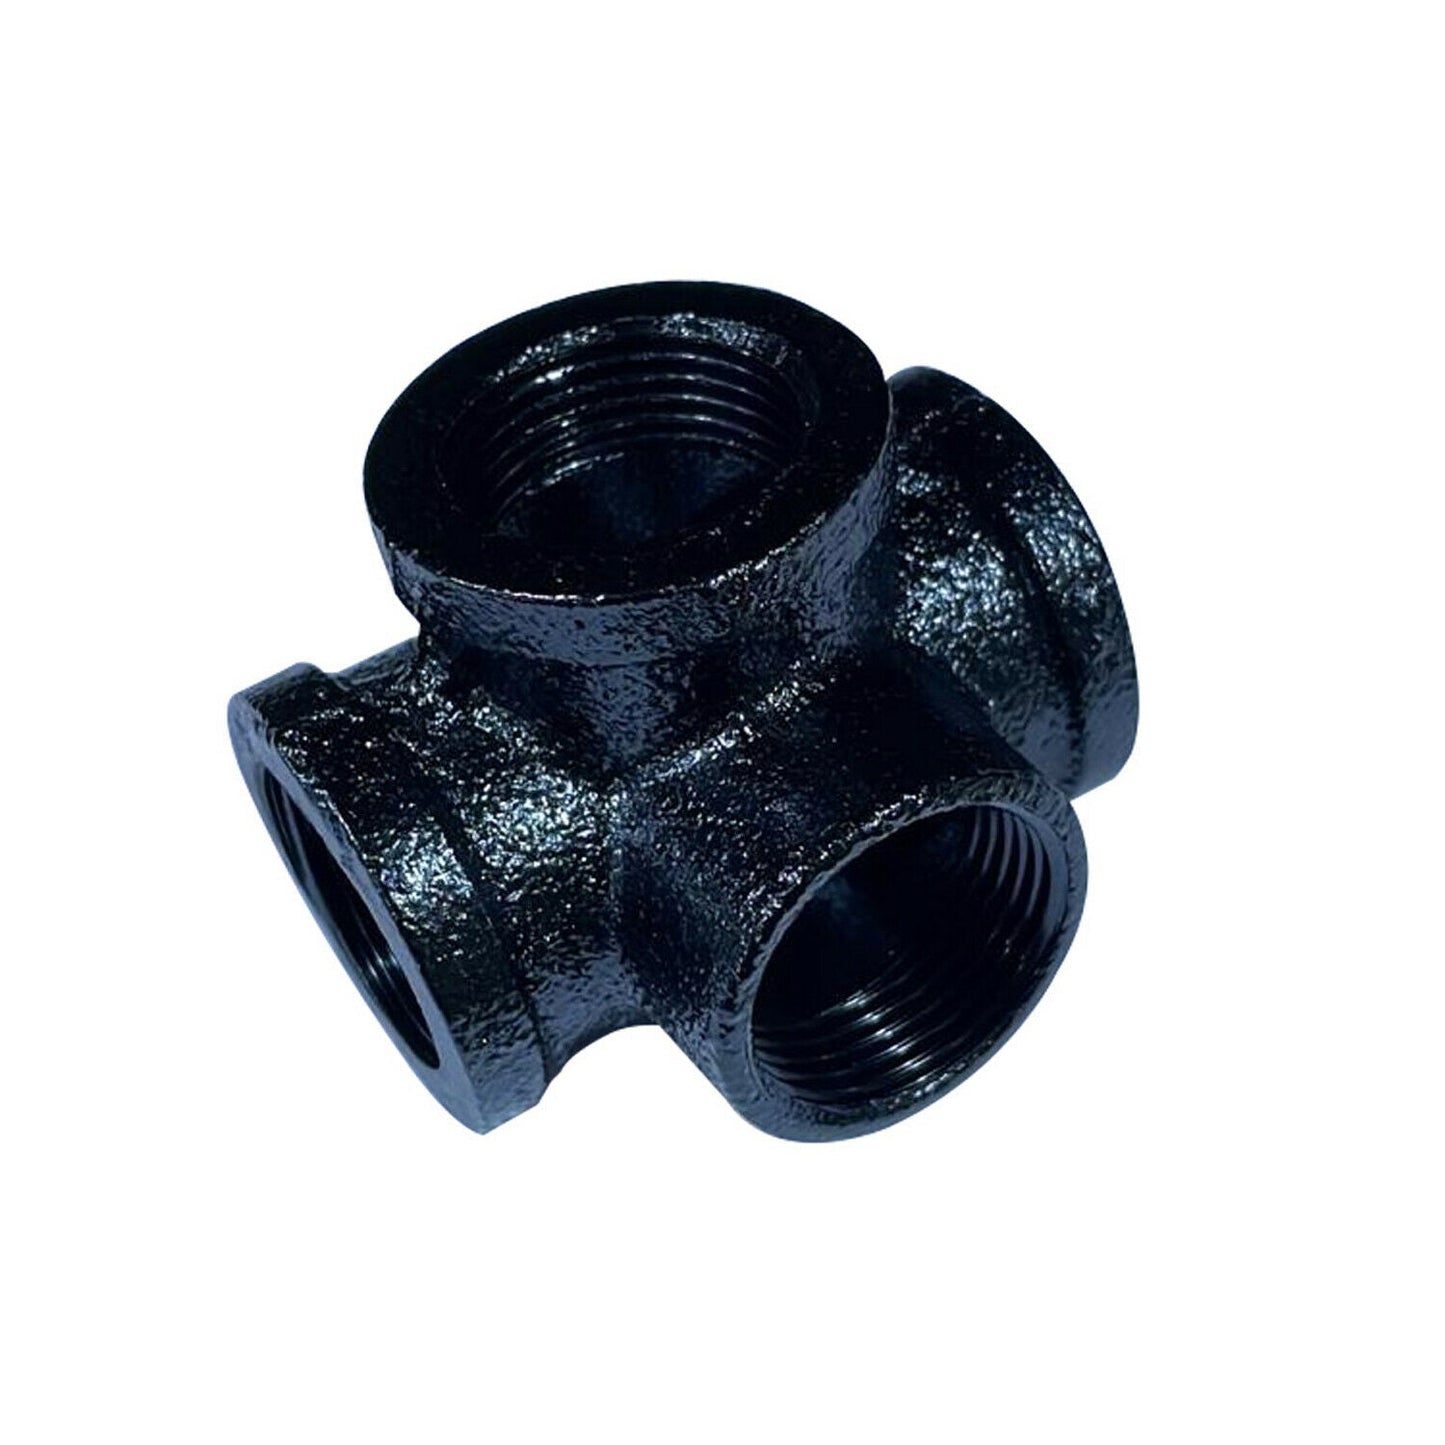 3/4 BSP steampunk lamp parts Iron pipe fitting